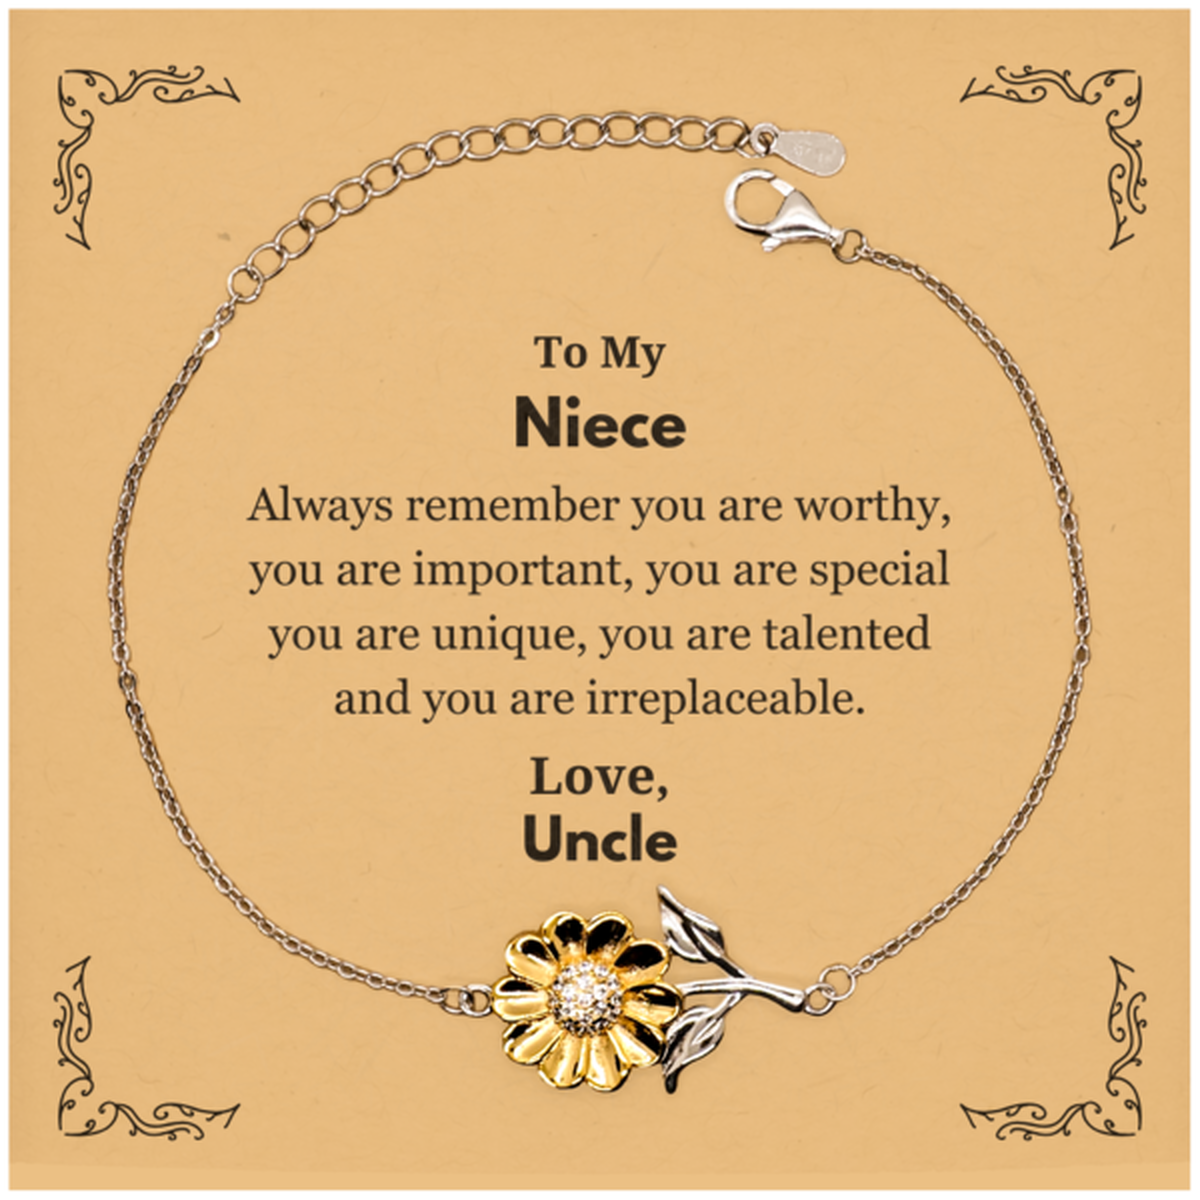 Niece Birthday Gifts from Uncle, Inspirational Sunflower Bracelet for Niece Christmas Graduation Gifts for Niece Always remember you are worthy, you are important. Love, Uncle